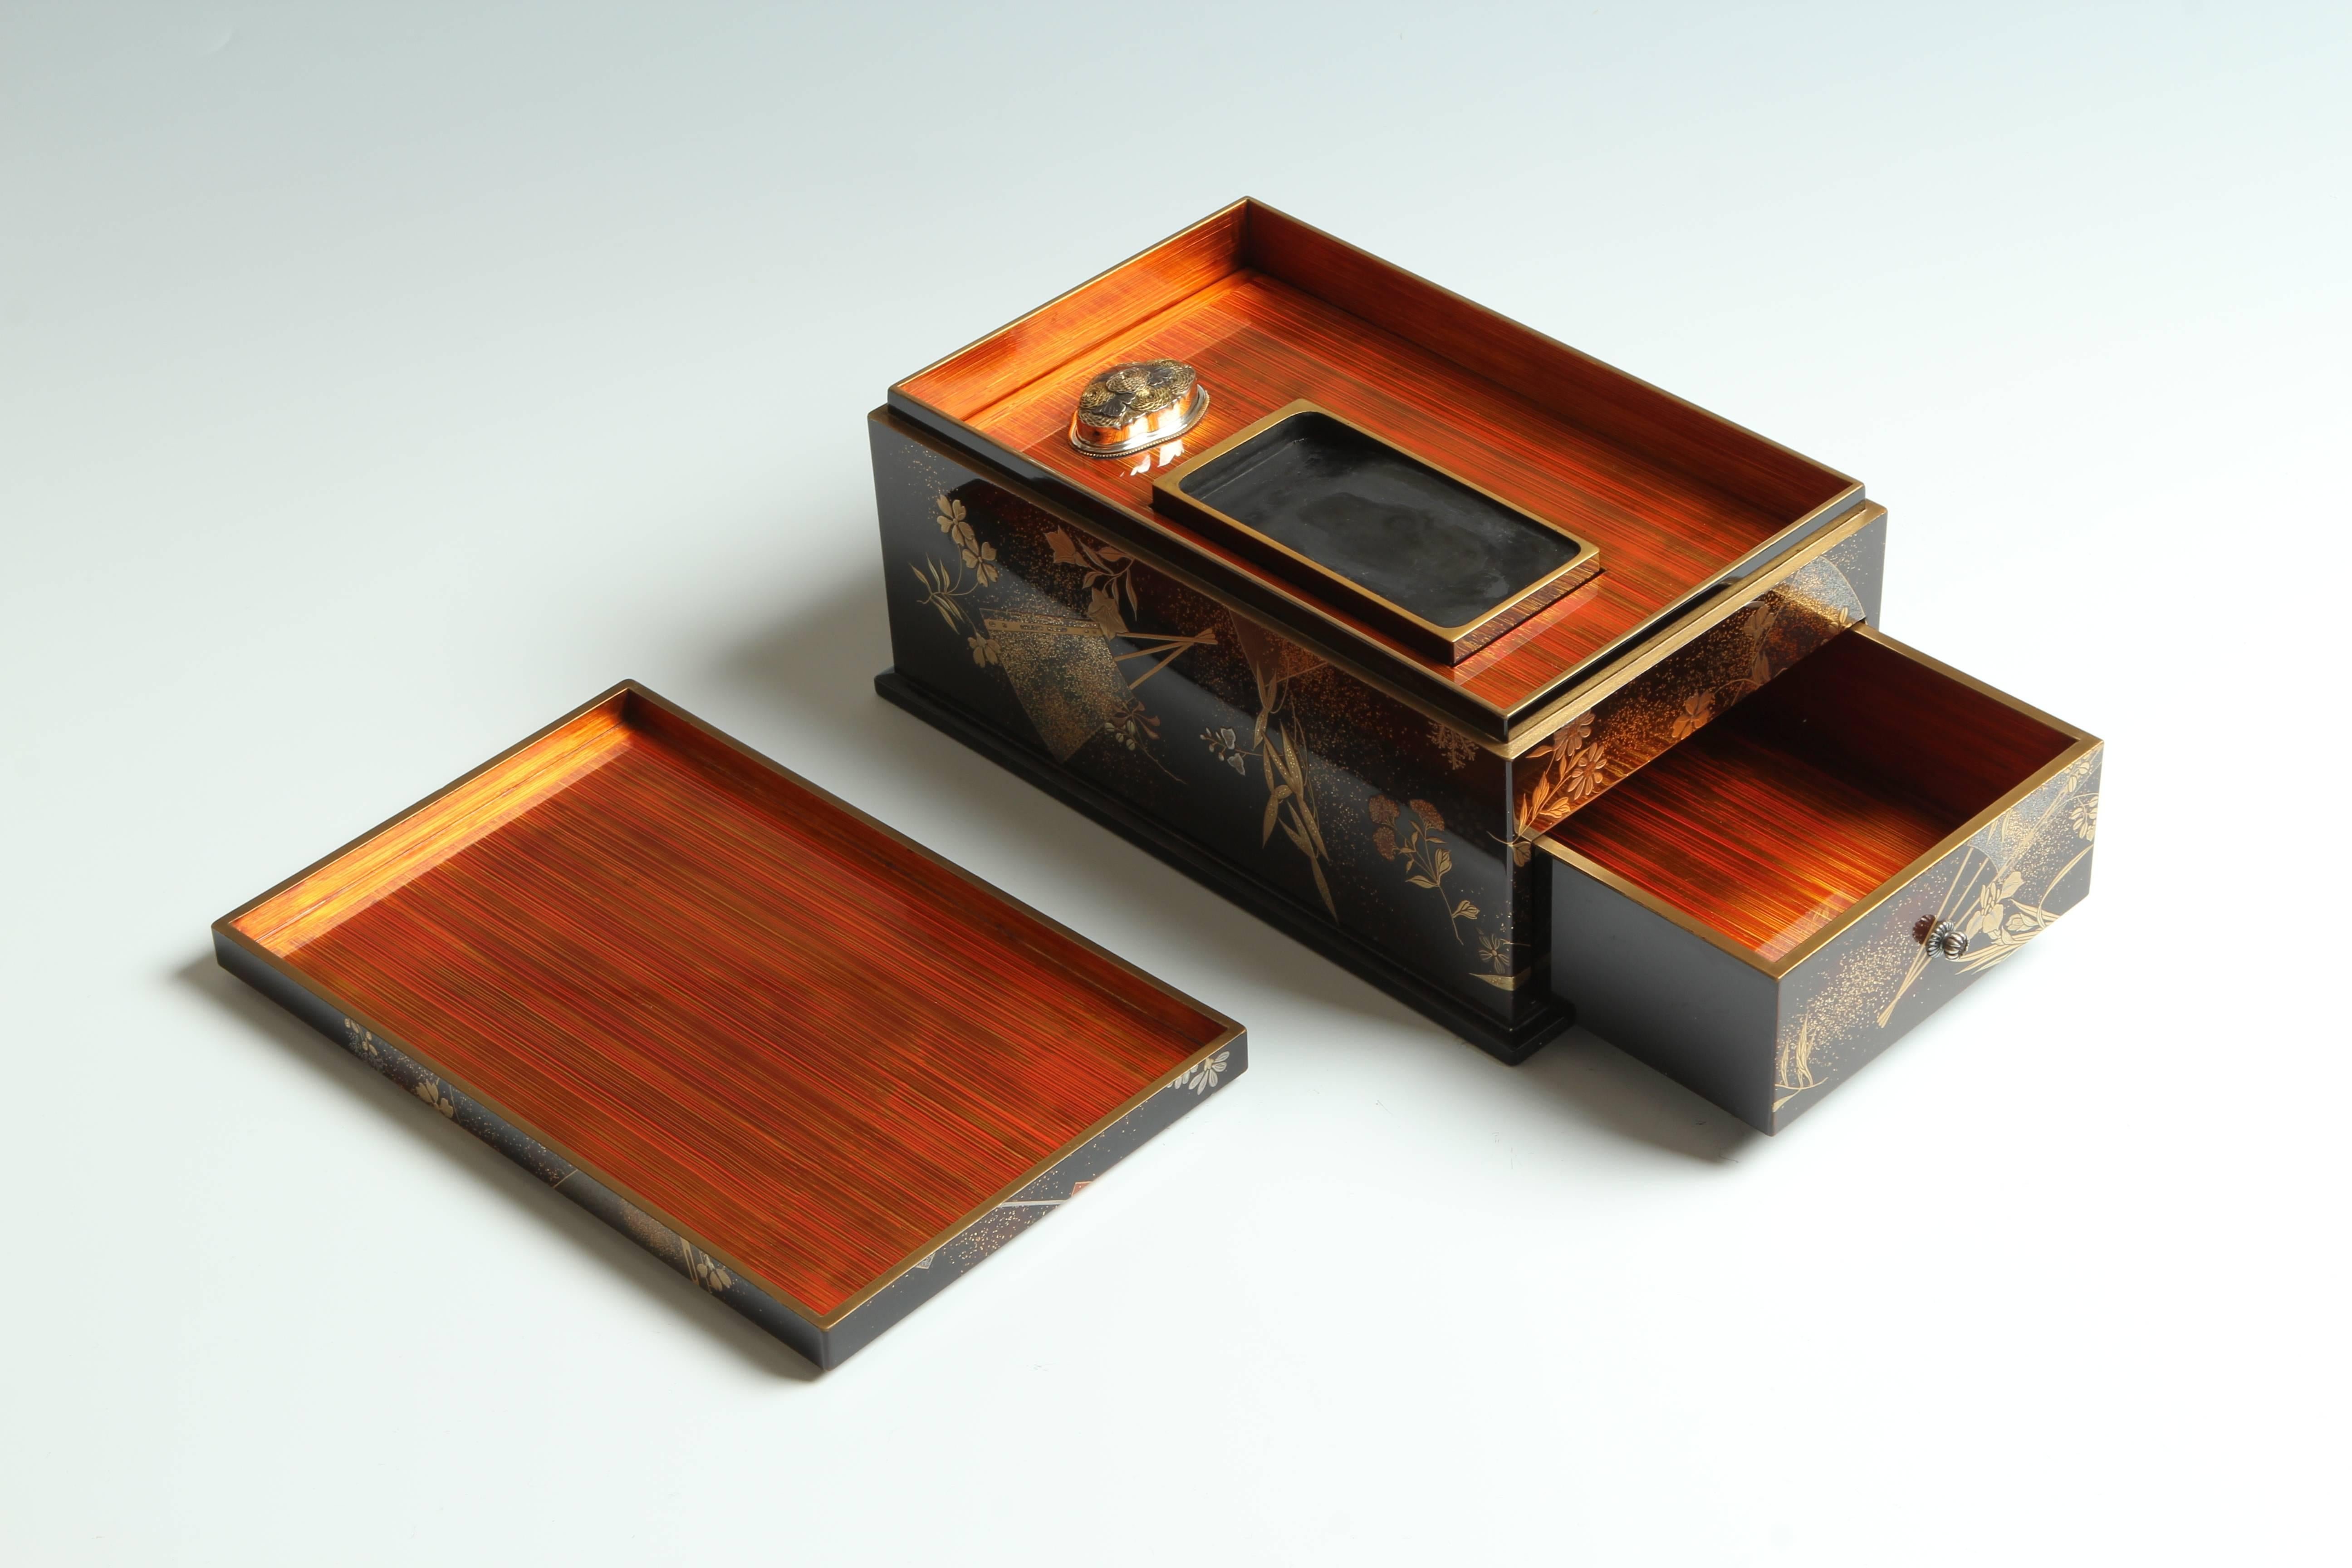 A nando suzuribako (writing box with en-suite storage) with aikuchi (flush-fitting) lid and beveled chiri-i (ledges between the top and the sides), comprising a box, lid, detachable tray fitted with removable suzuri (ink stone) and suiteki